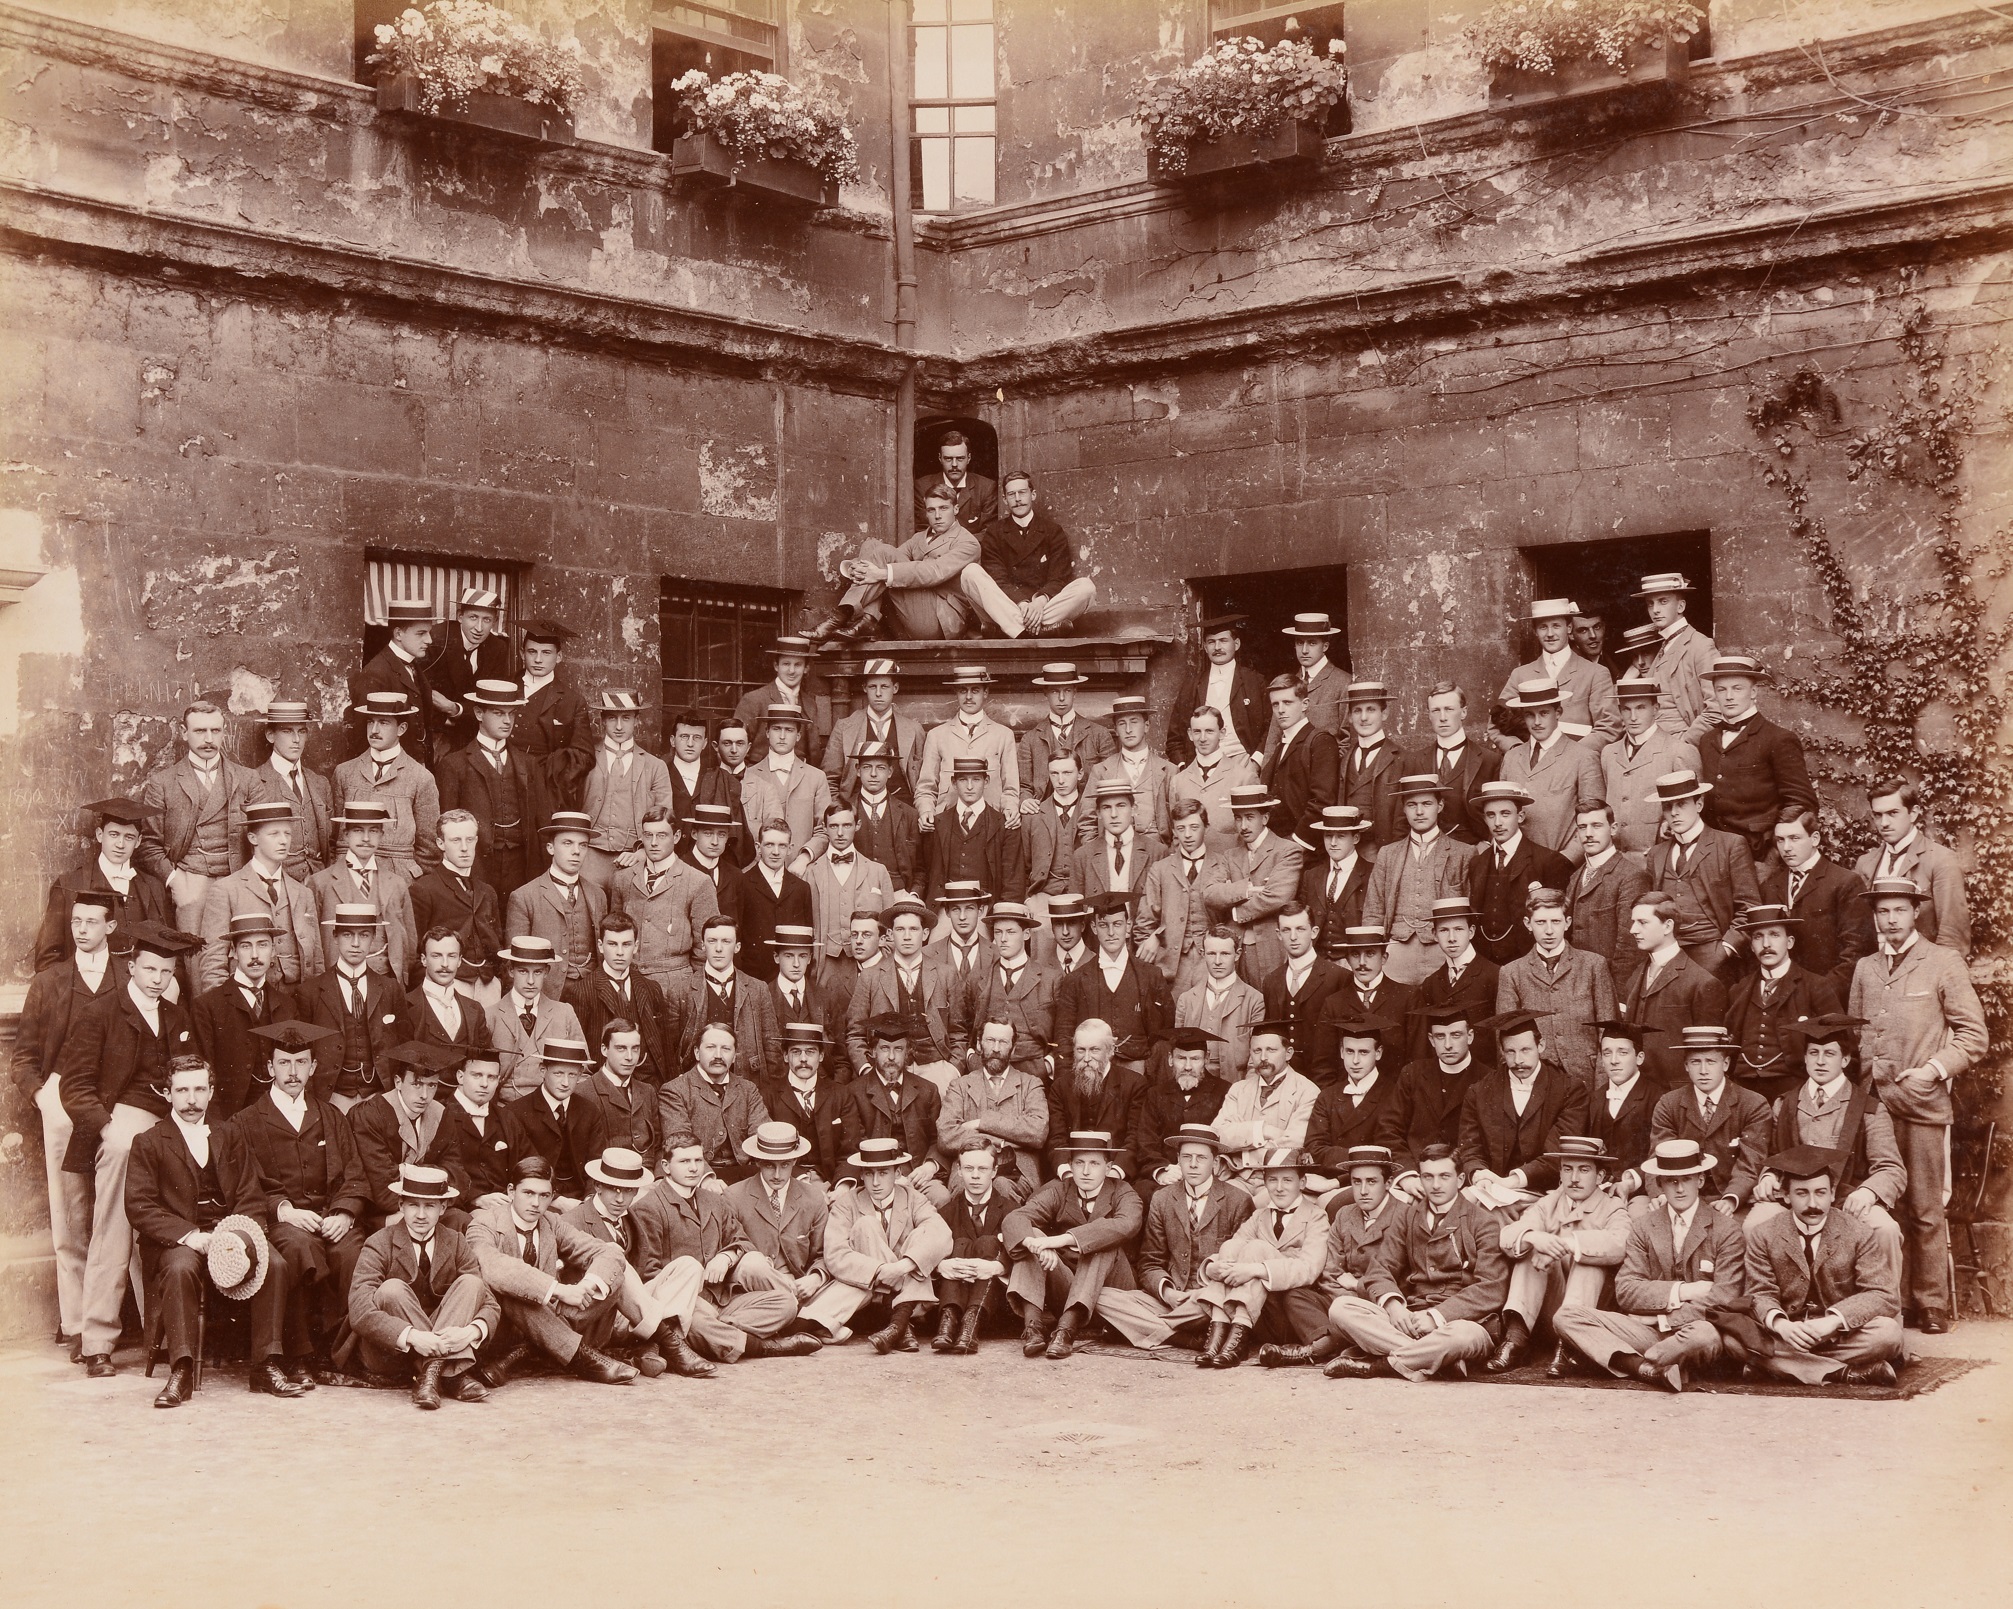 A historic photograph showing a group of Trinity College students in 1898 outside Staircase 14 in college.